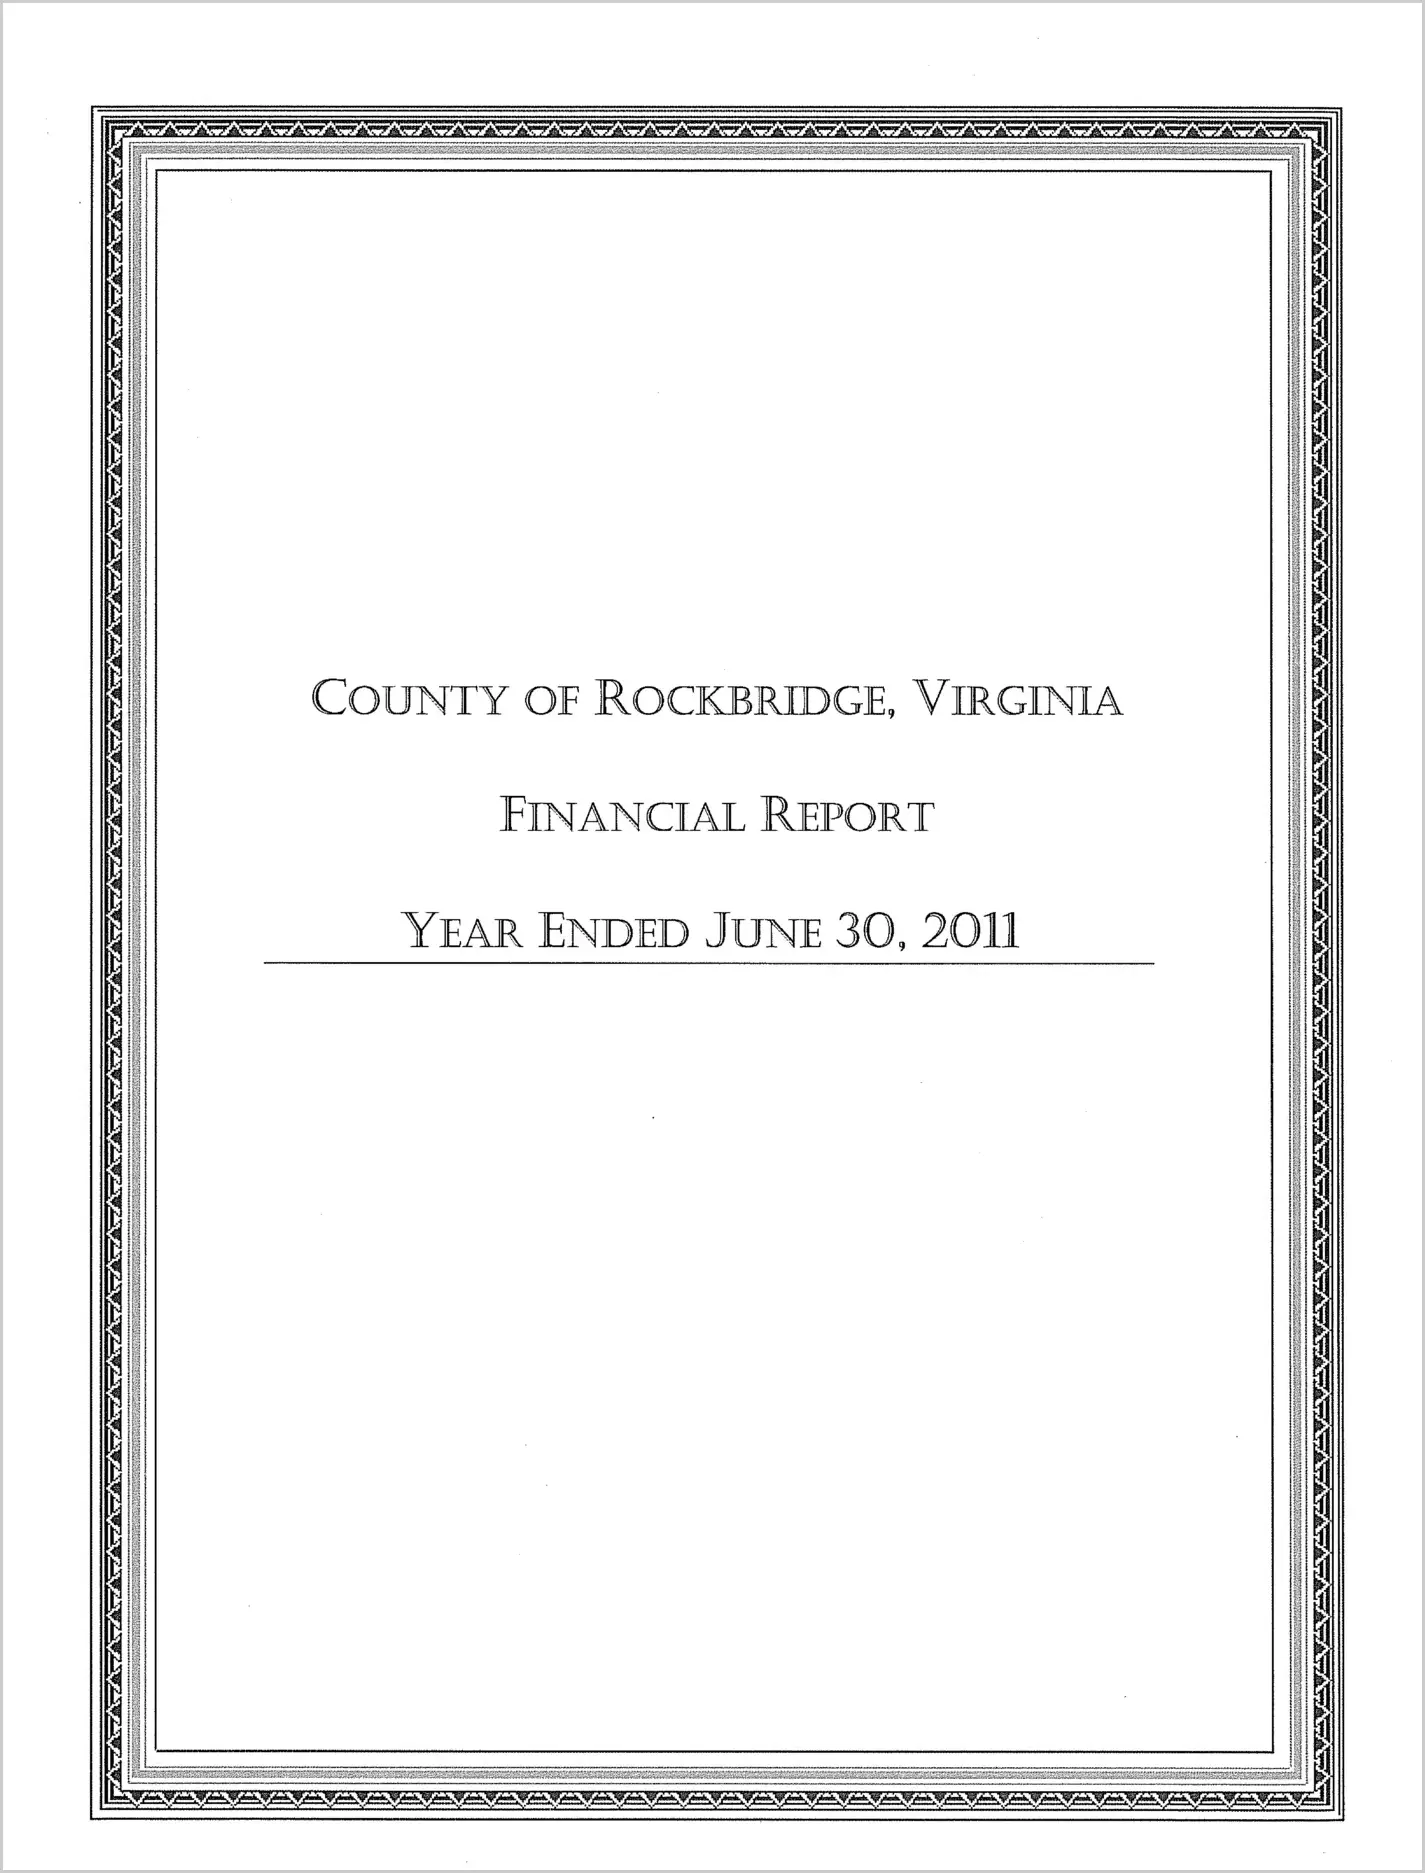 2011 Annual Financial Report for County of Rockbridge